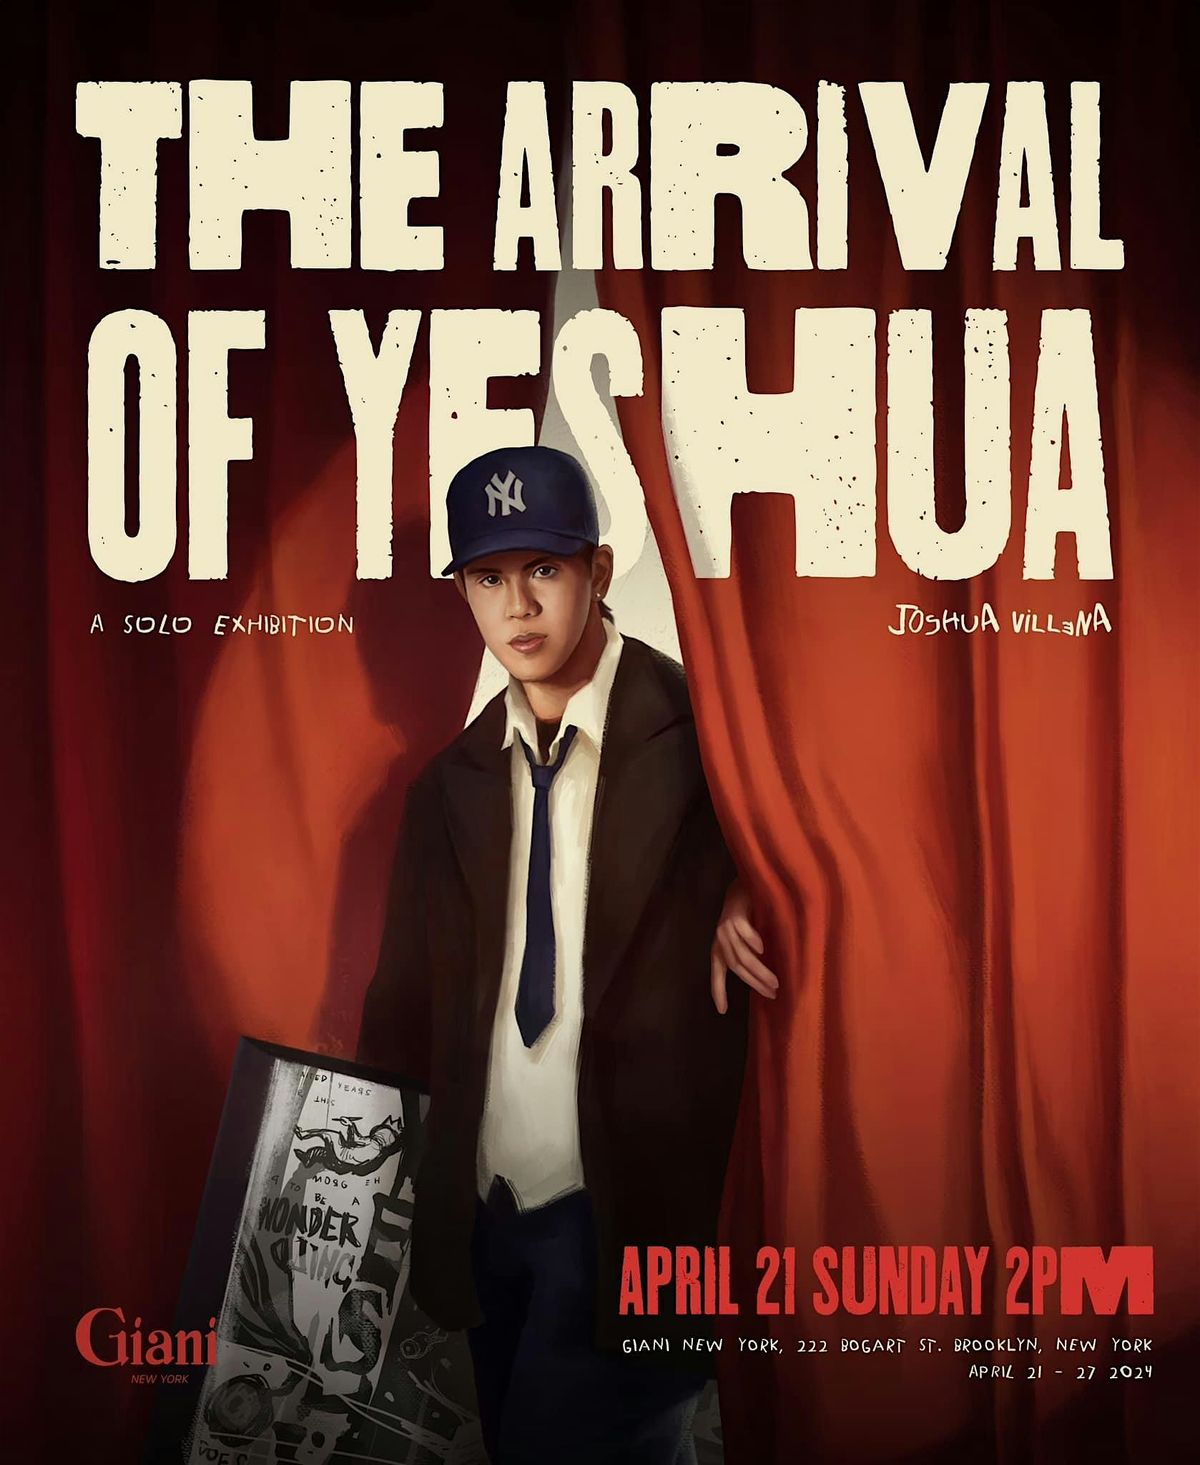 The Arrival of Yeshua - Art Exhibition in New York